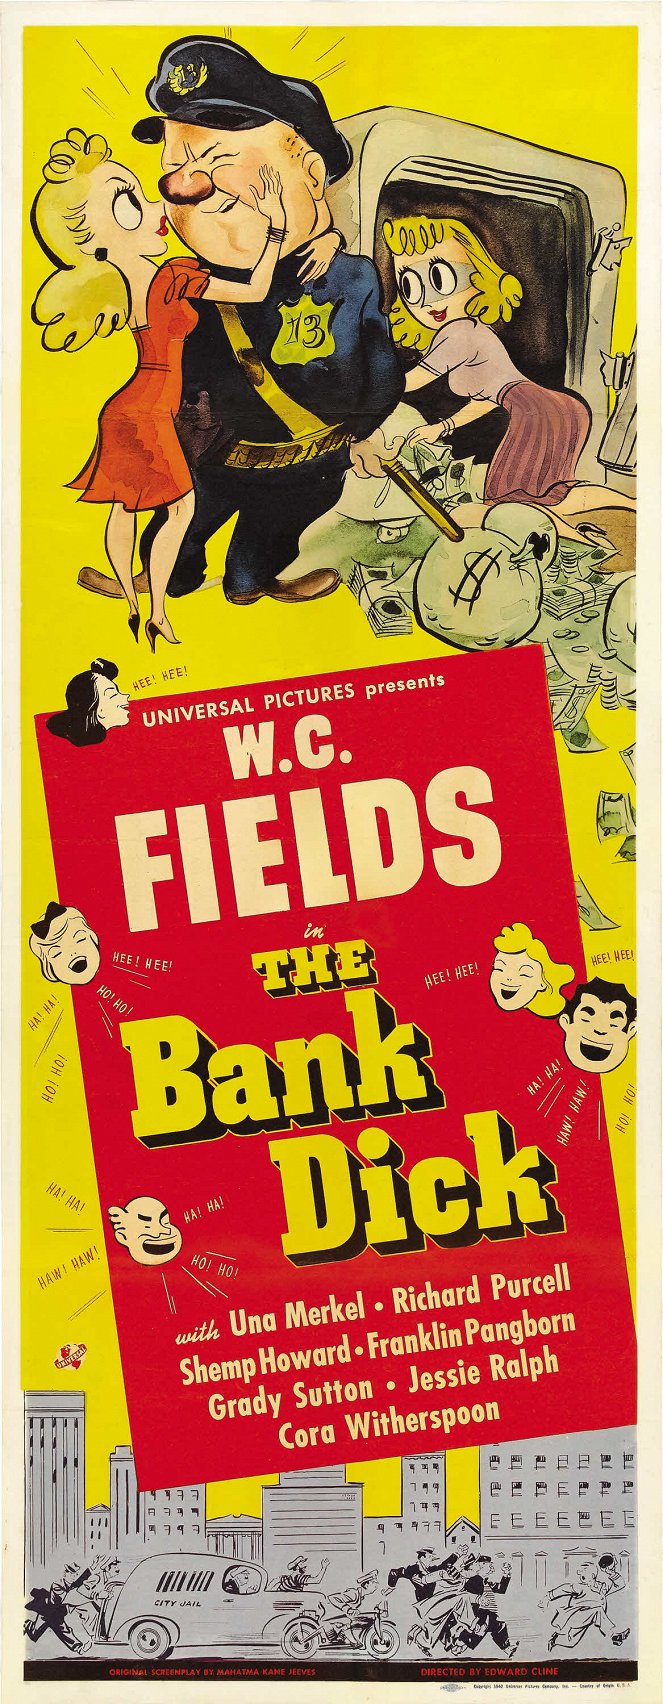 The Bank Dick - Posters